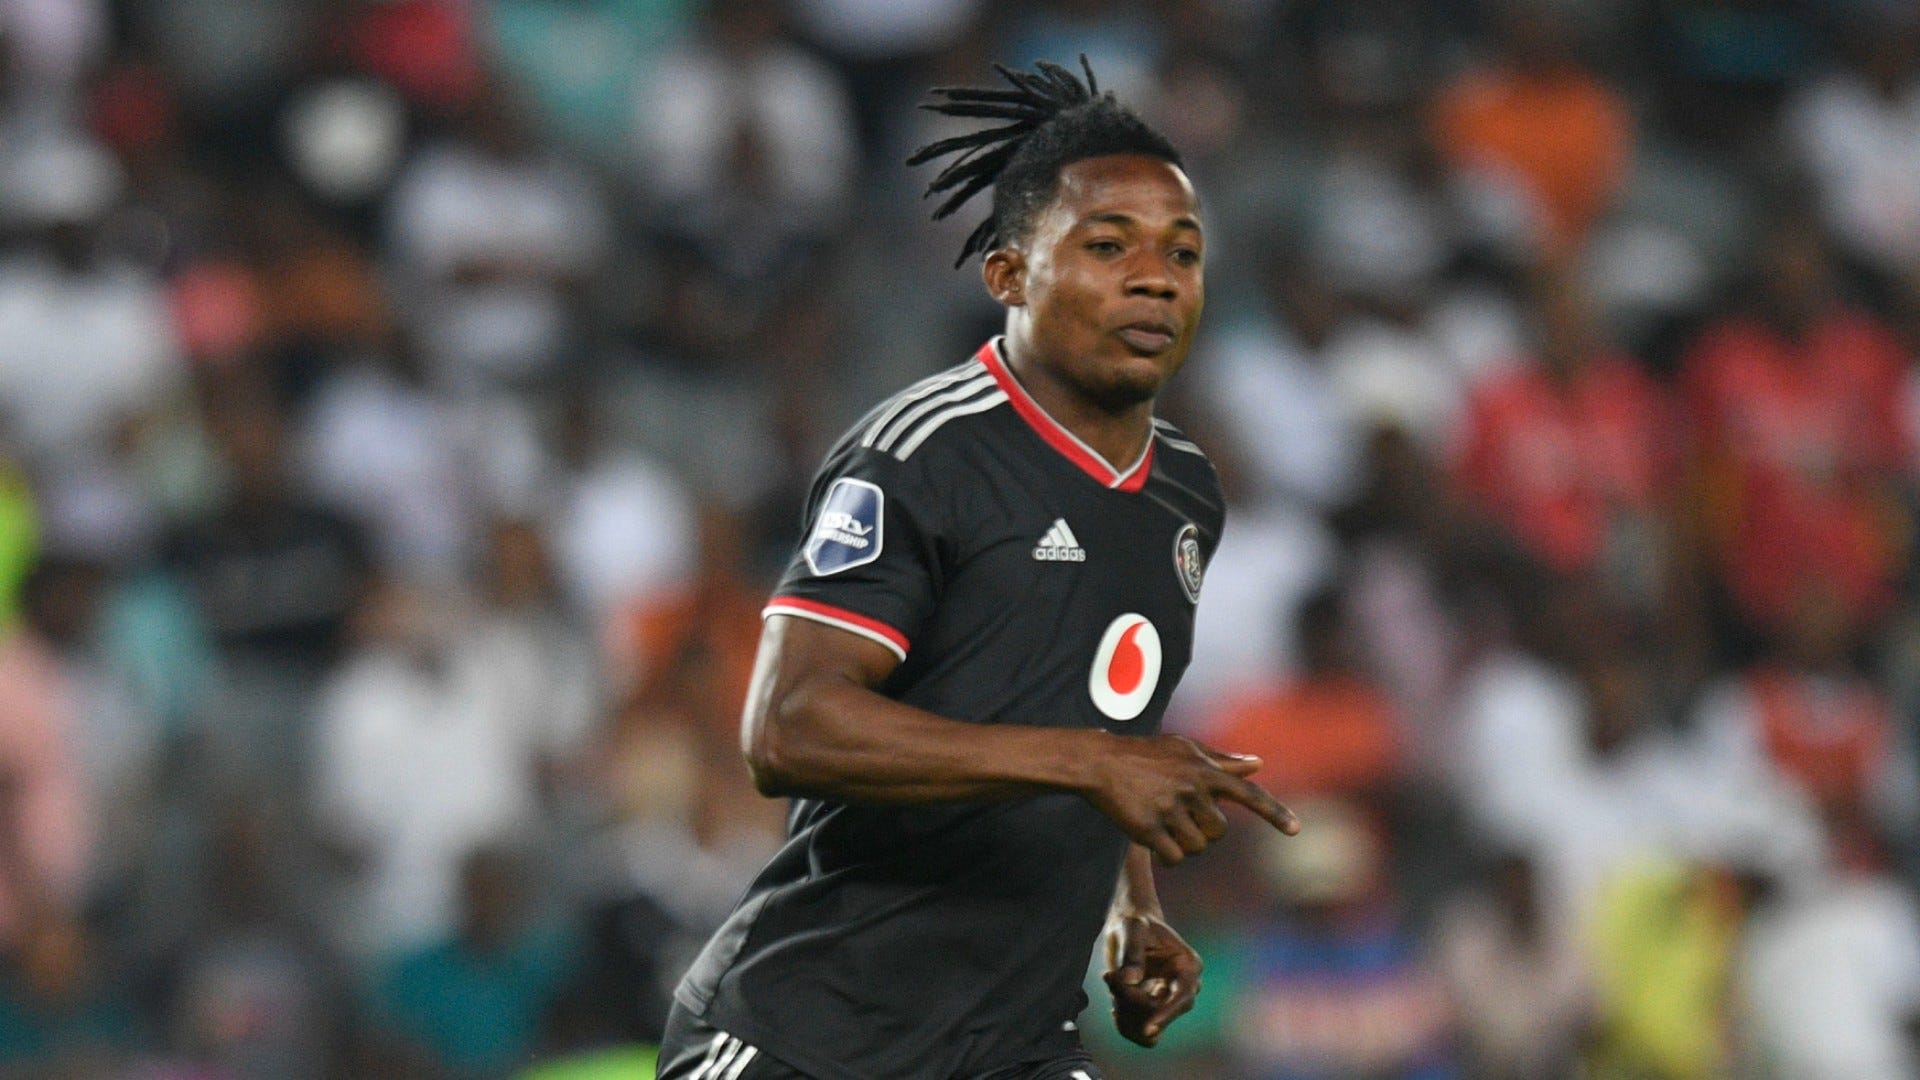 Confirmed: Orlando Pirates announce Kwame Peprah signing on a two-year deal